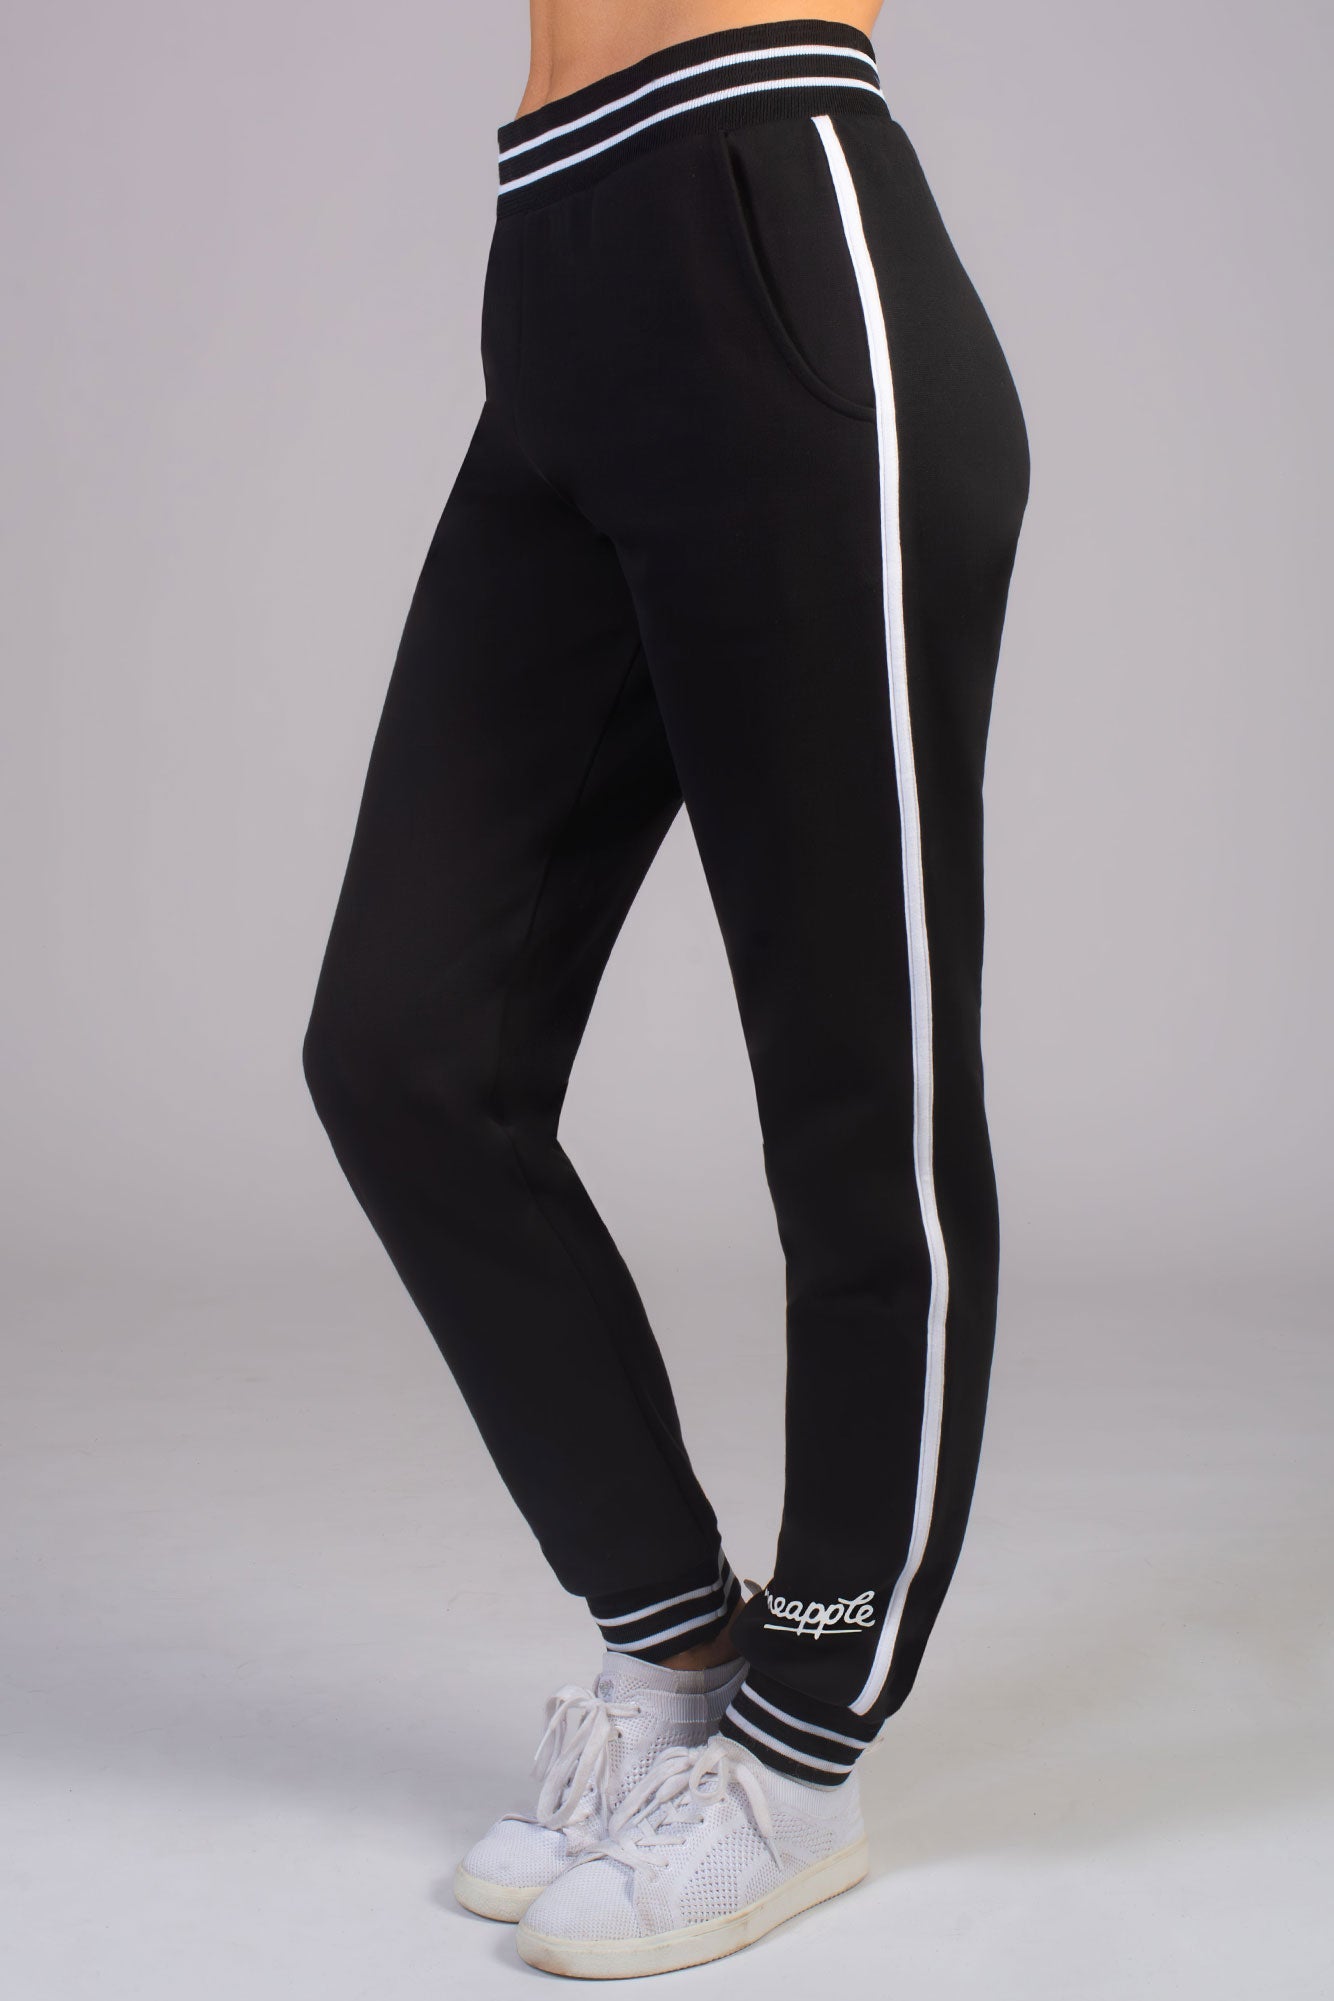 Black Solid Imported Polycotton Lycra Lower/Trackpants ( Joggers ), Regular  Fit, Size: M L XL XXL at Rs 249/piece in Delhi